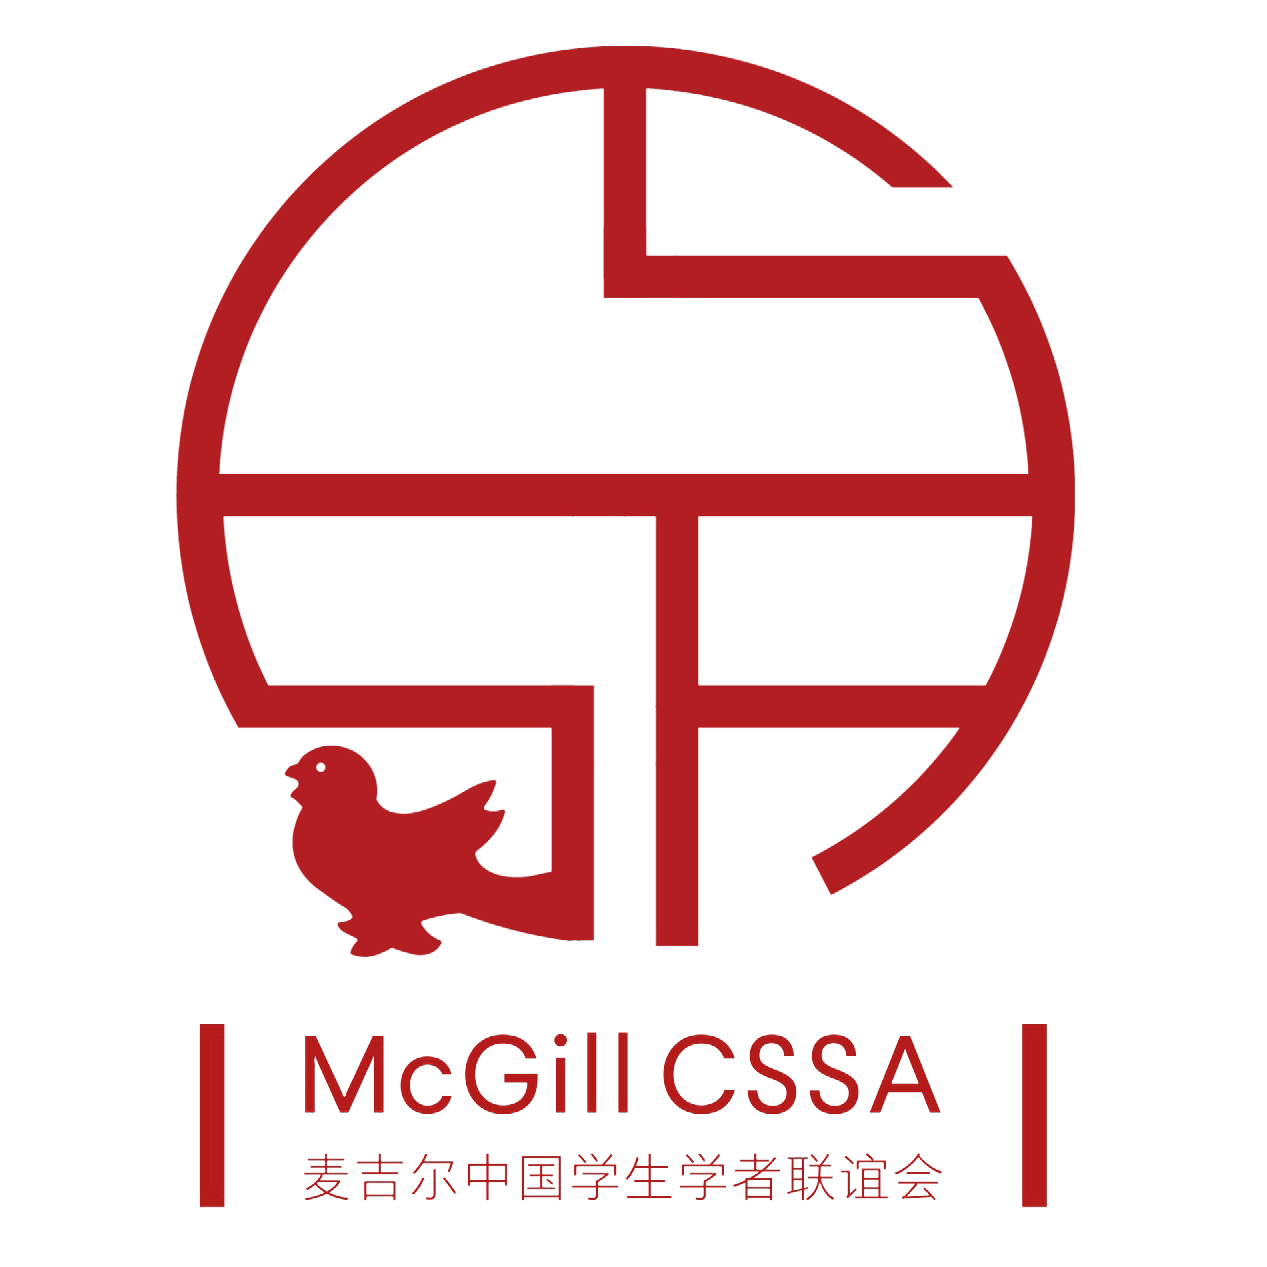 Chinese Students and Scholars Association at McGill University